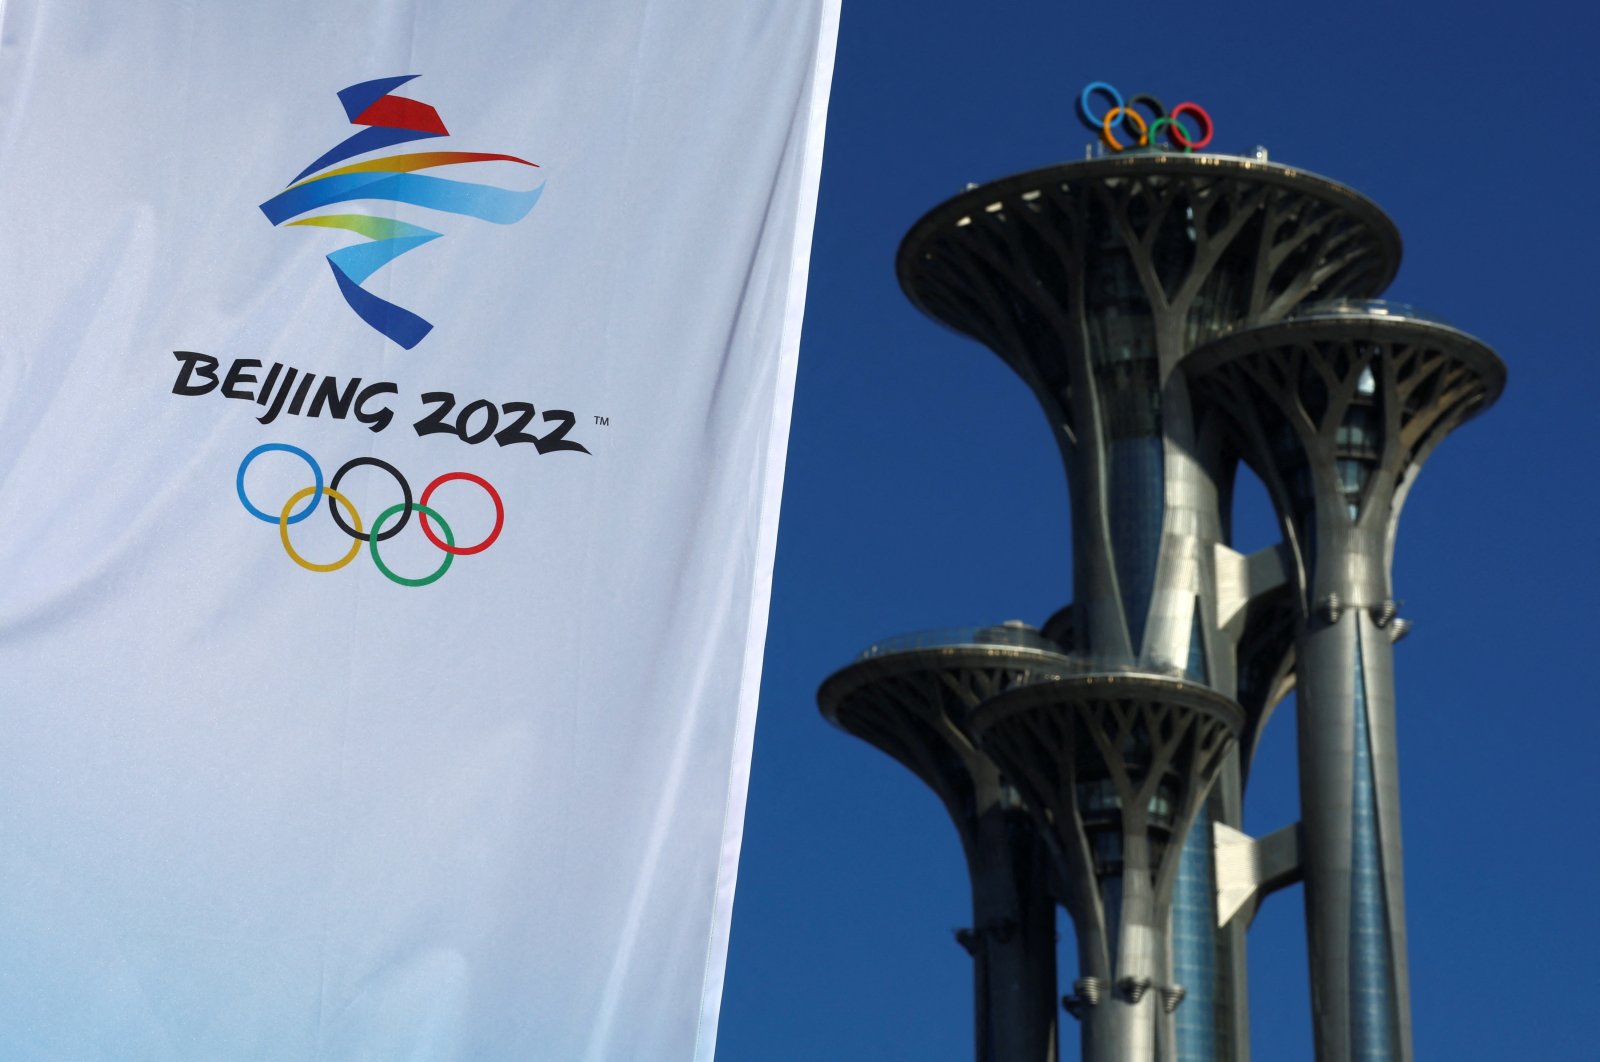 The Beijing Olympic Tower is pictured near the Main Press Centre ahead of the Beijing 2022 Winter Olympics in Beijing, China, Jan. 6, 2022. (Reuters Photo)